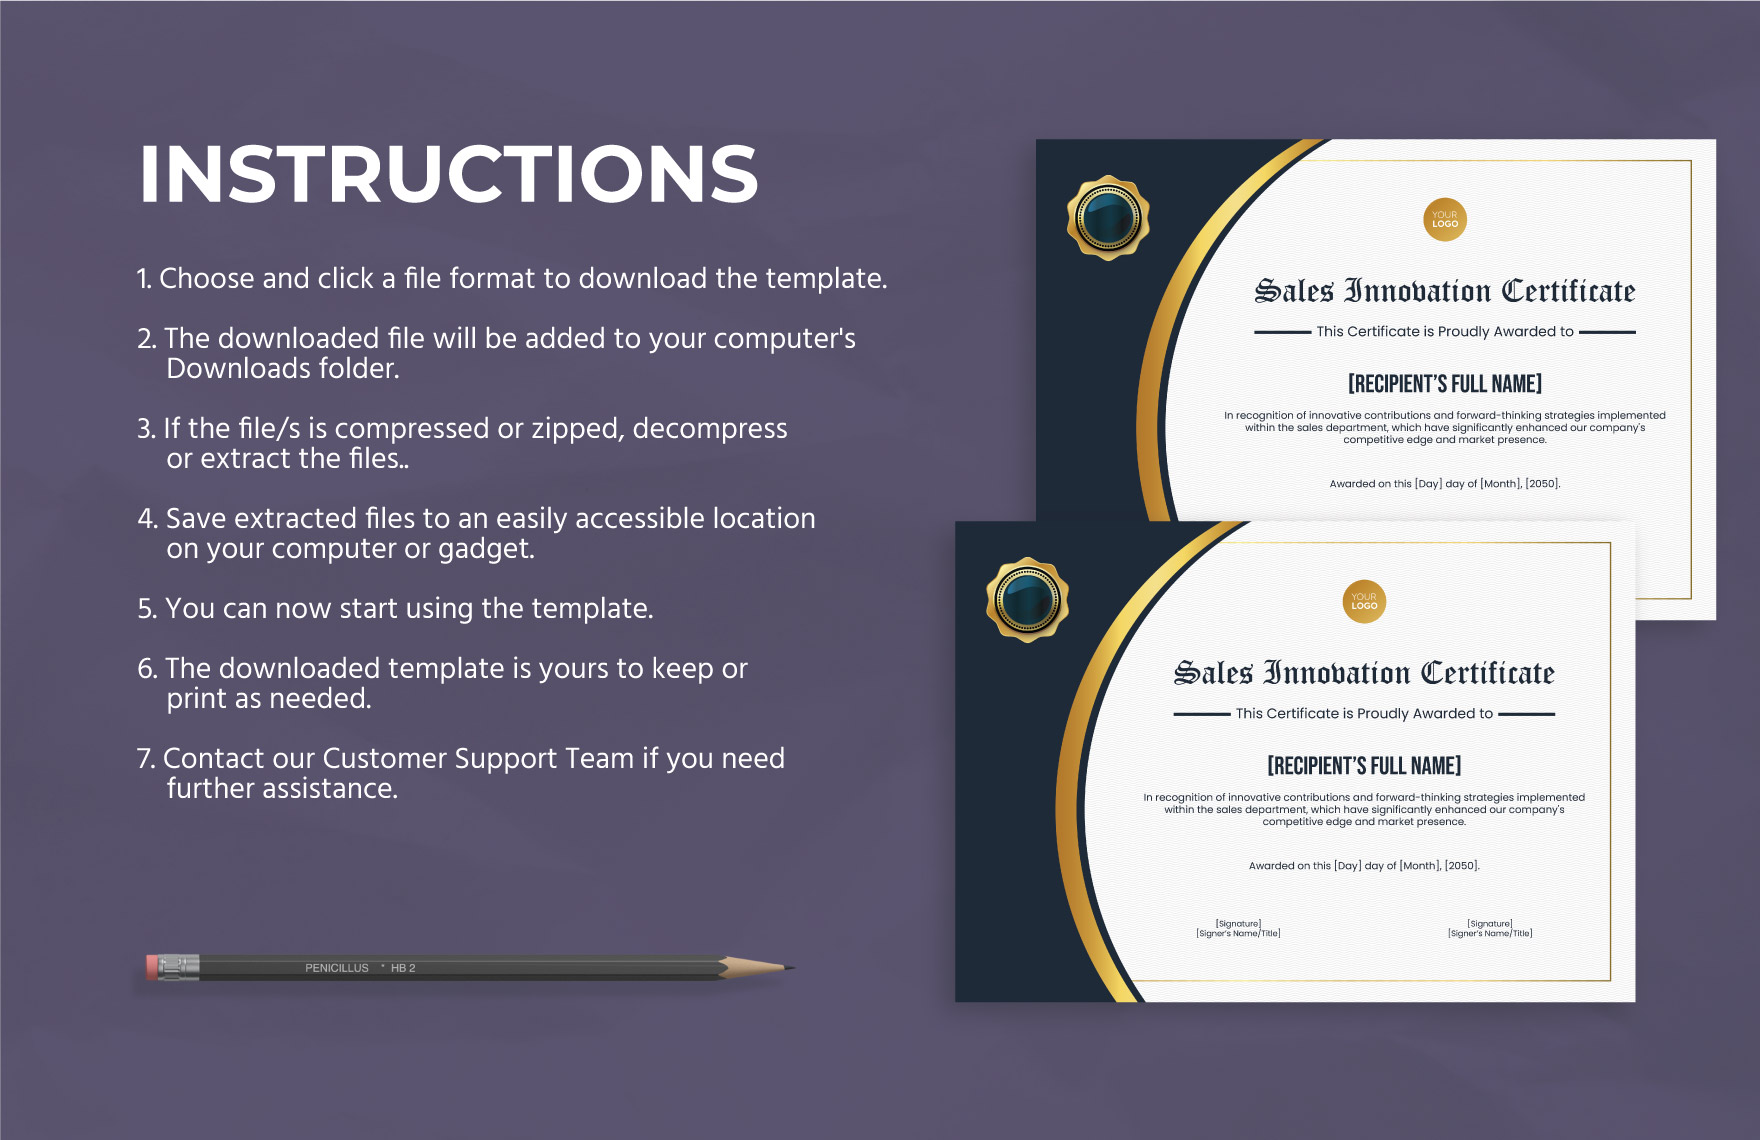 Sales Innovation Certificate Template